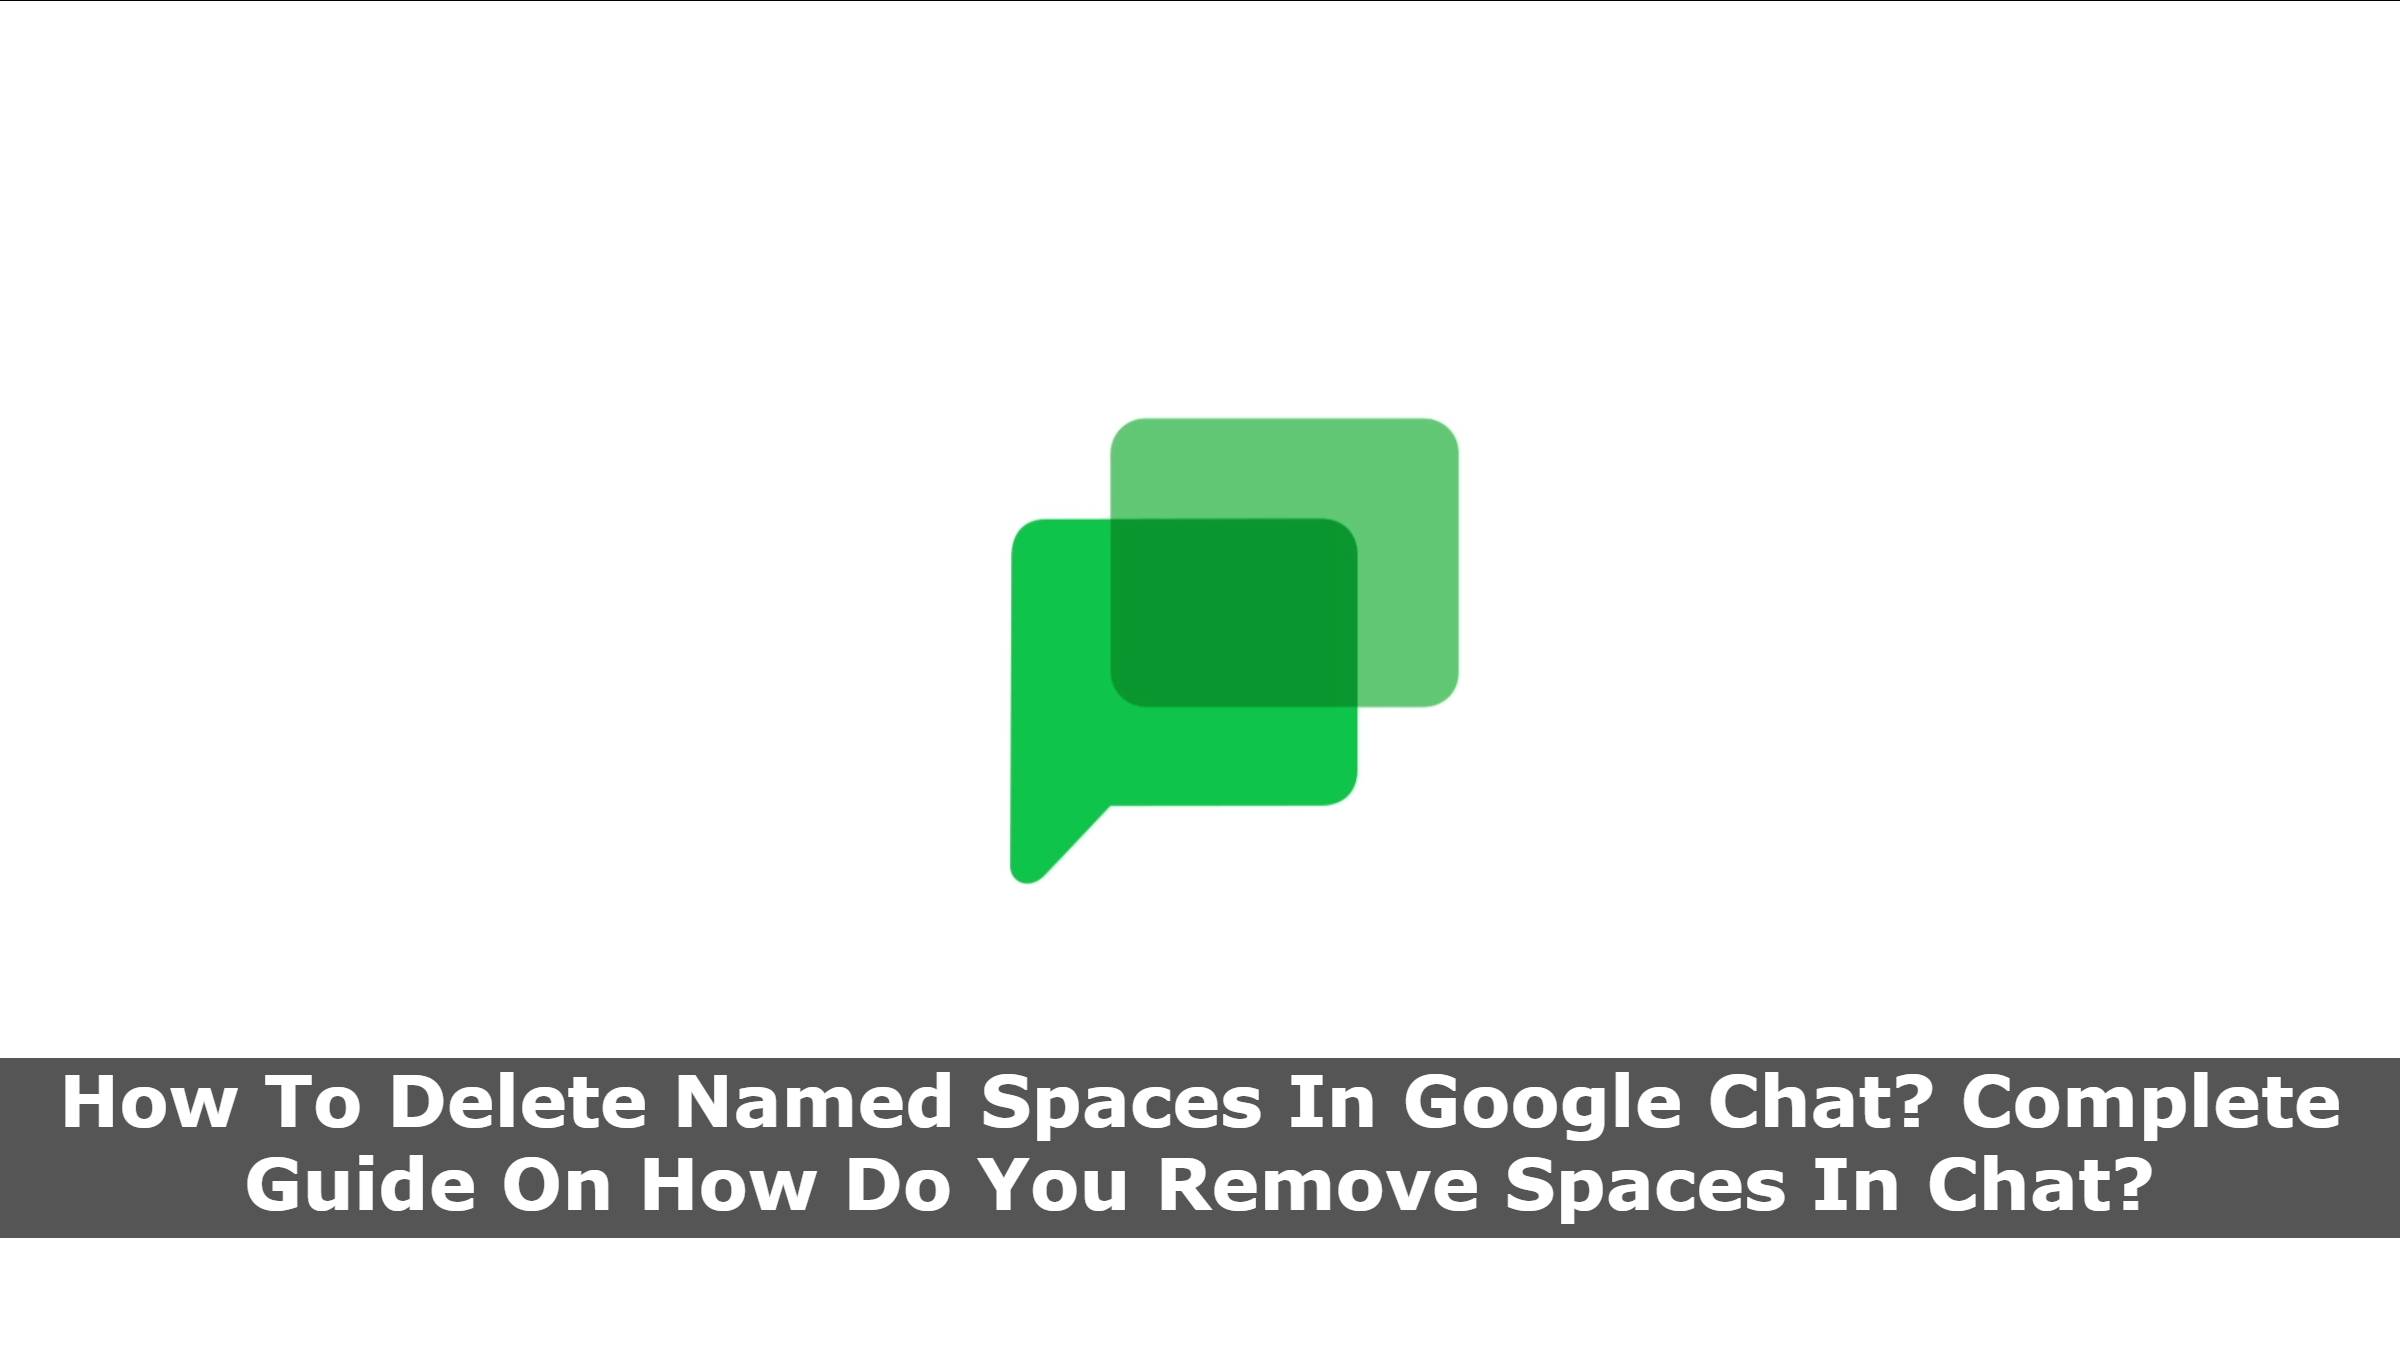 How To Delete Named Spaces In Google Chat? Complete Guide On How Do You Remove Spaces In Chat?